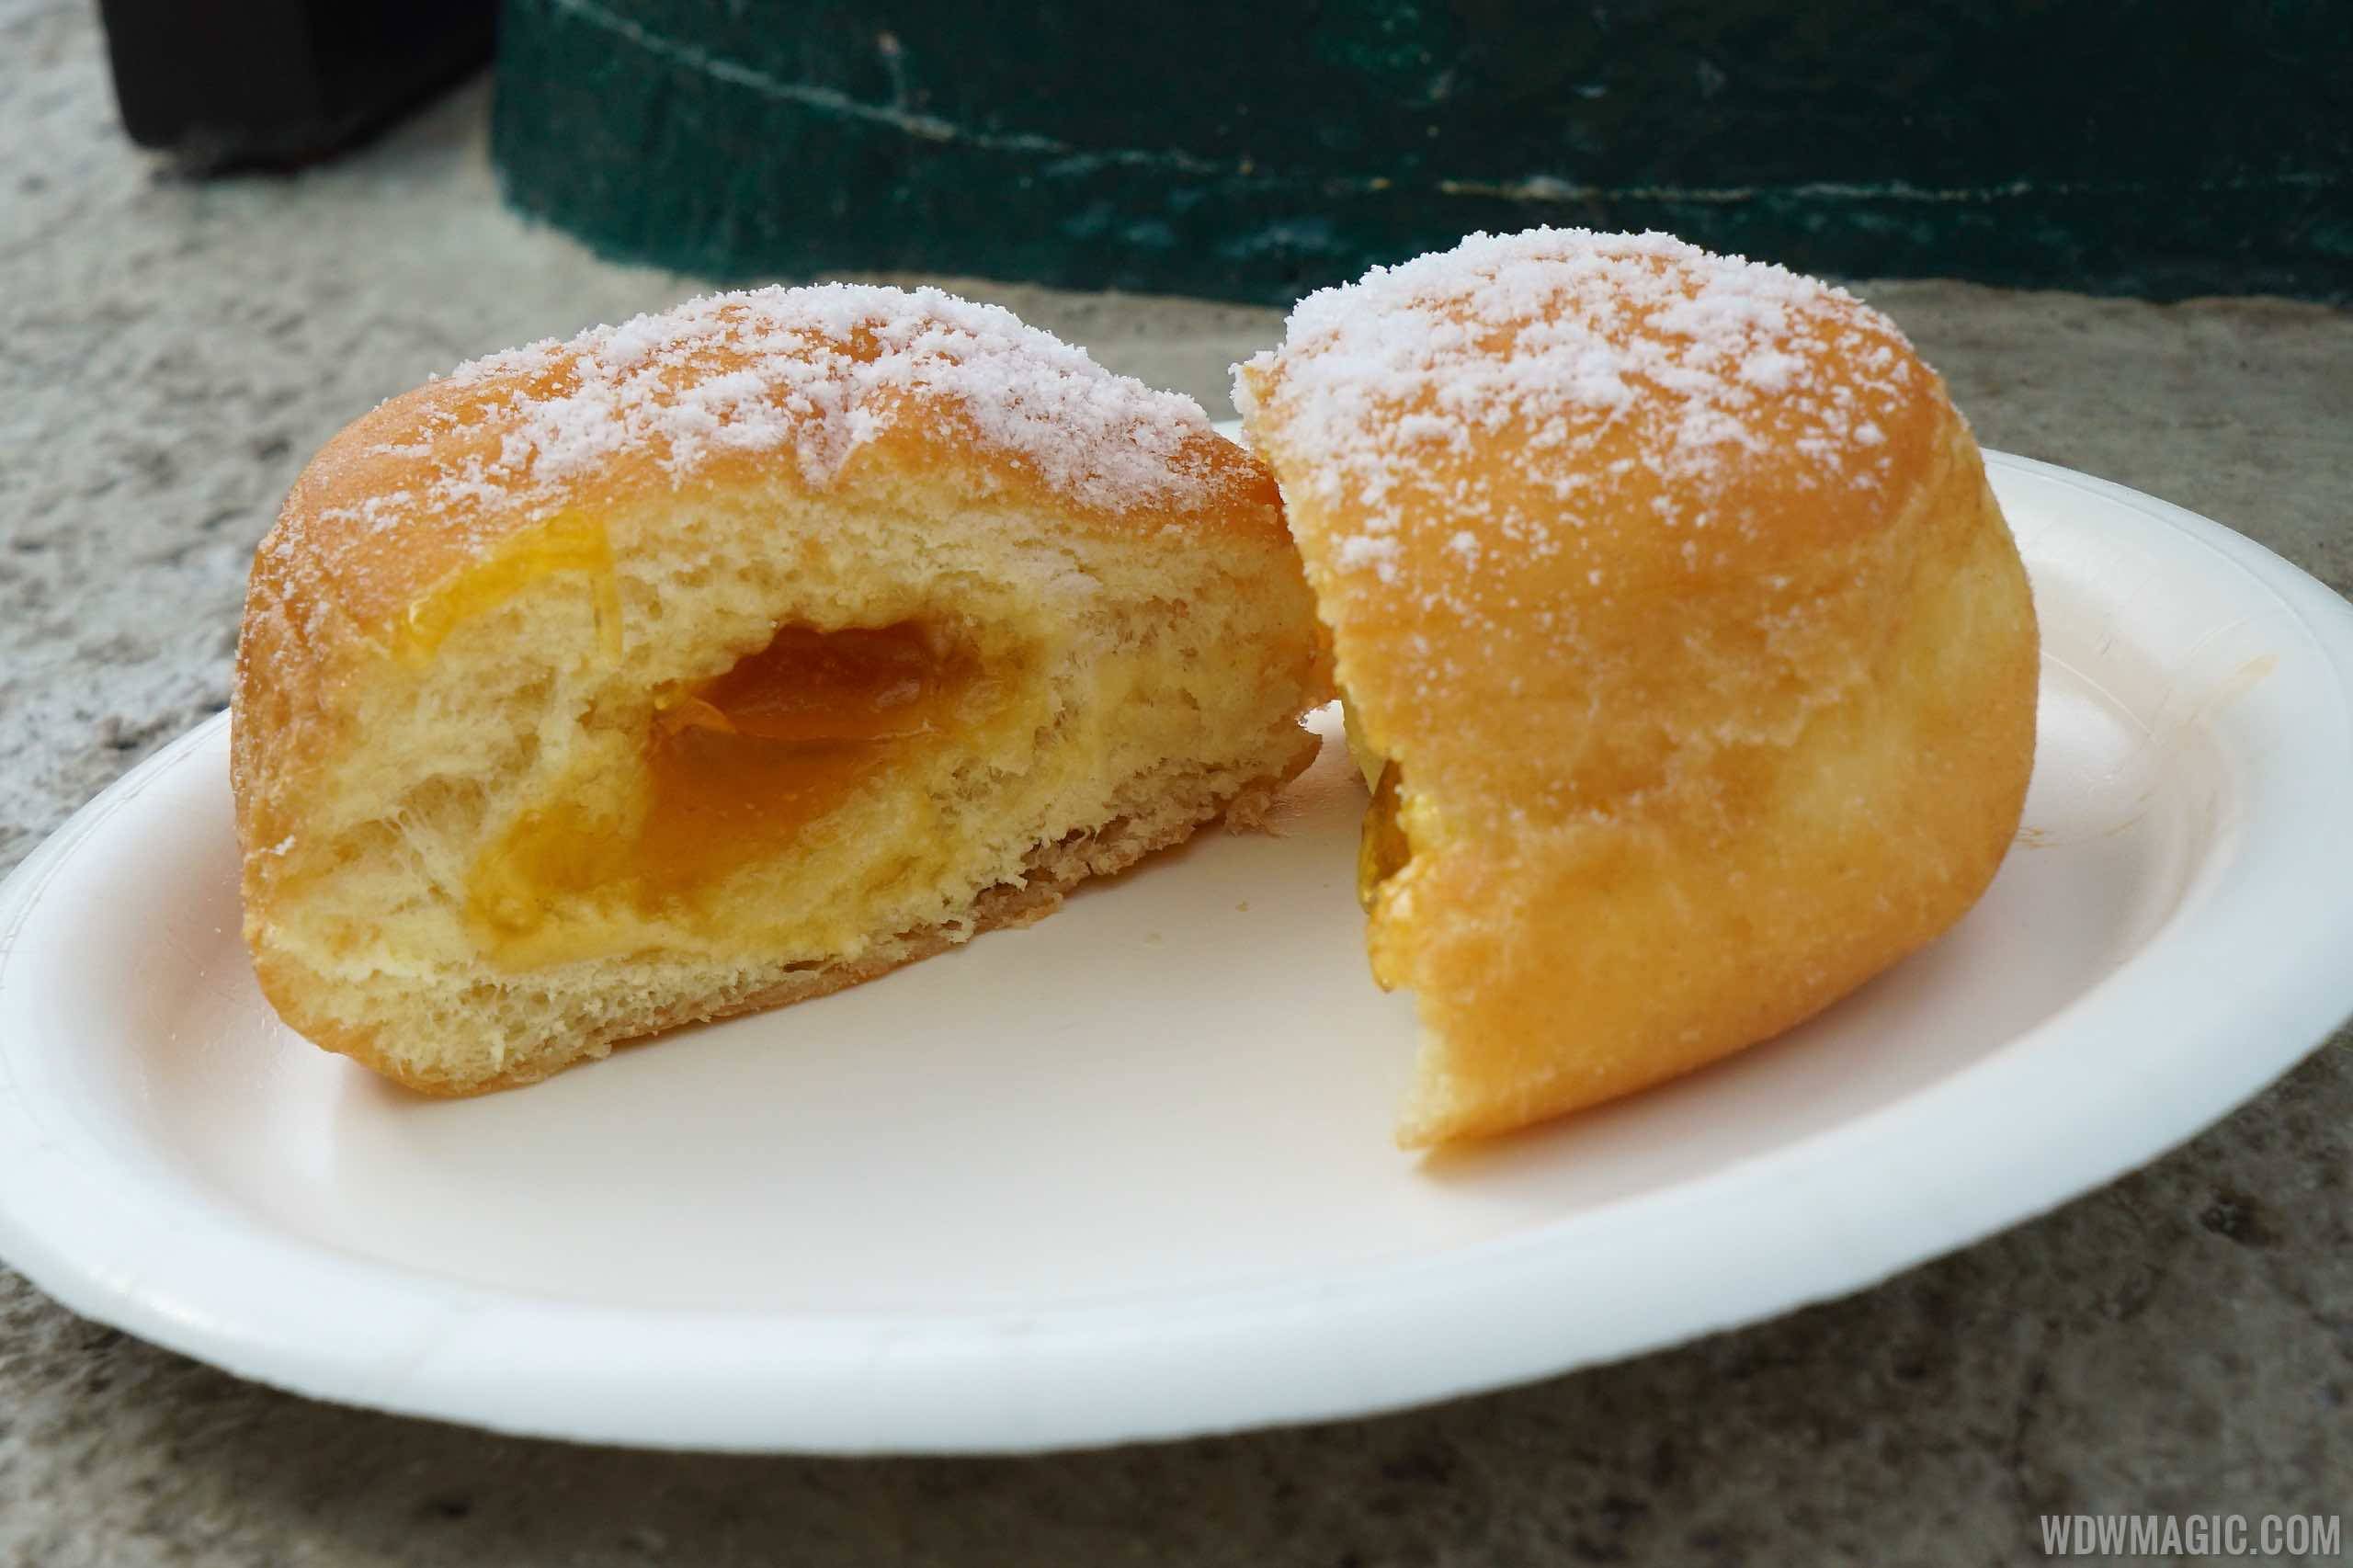 Germany - Berliner Yeast doughnut filled with apricot jam